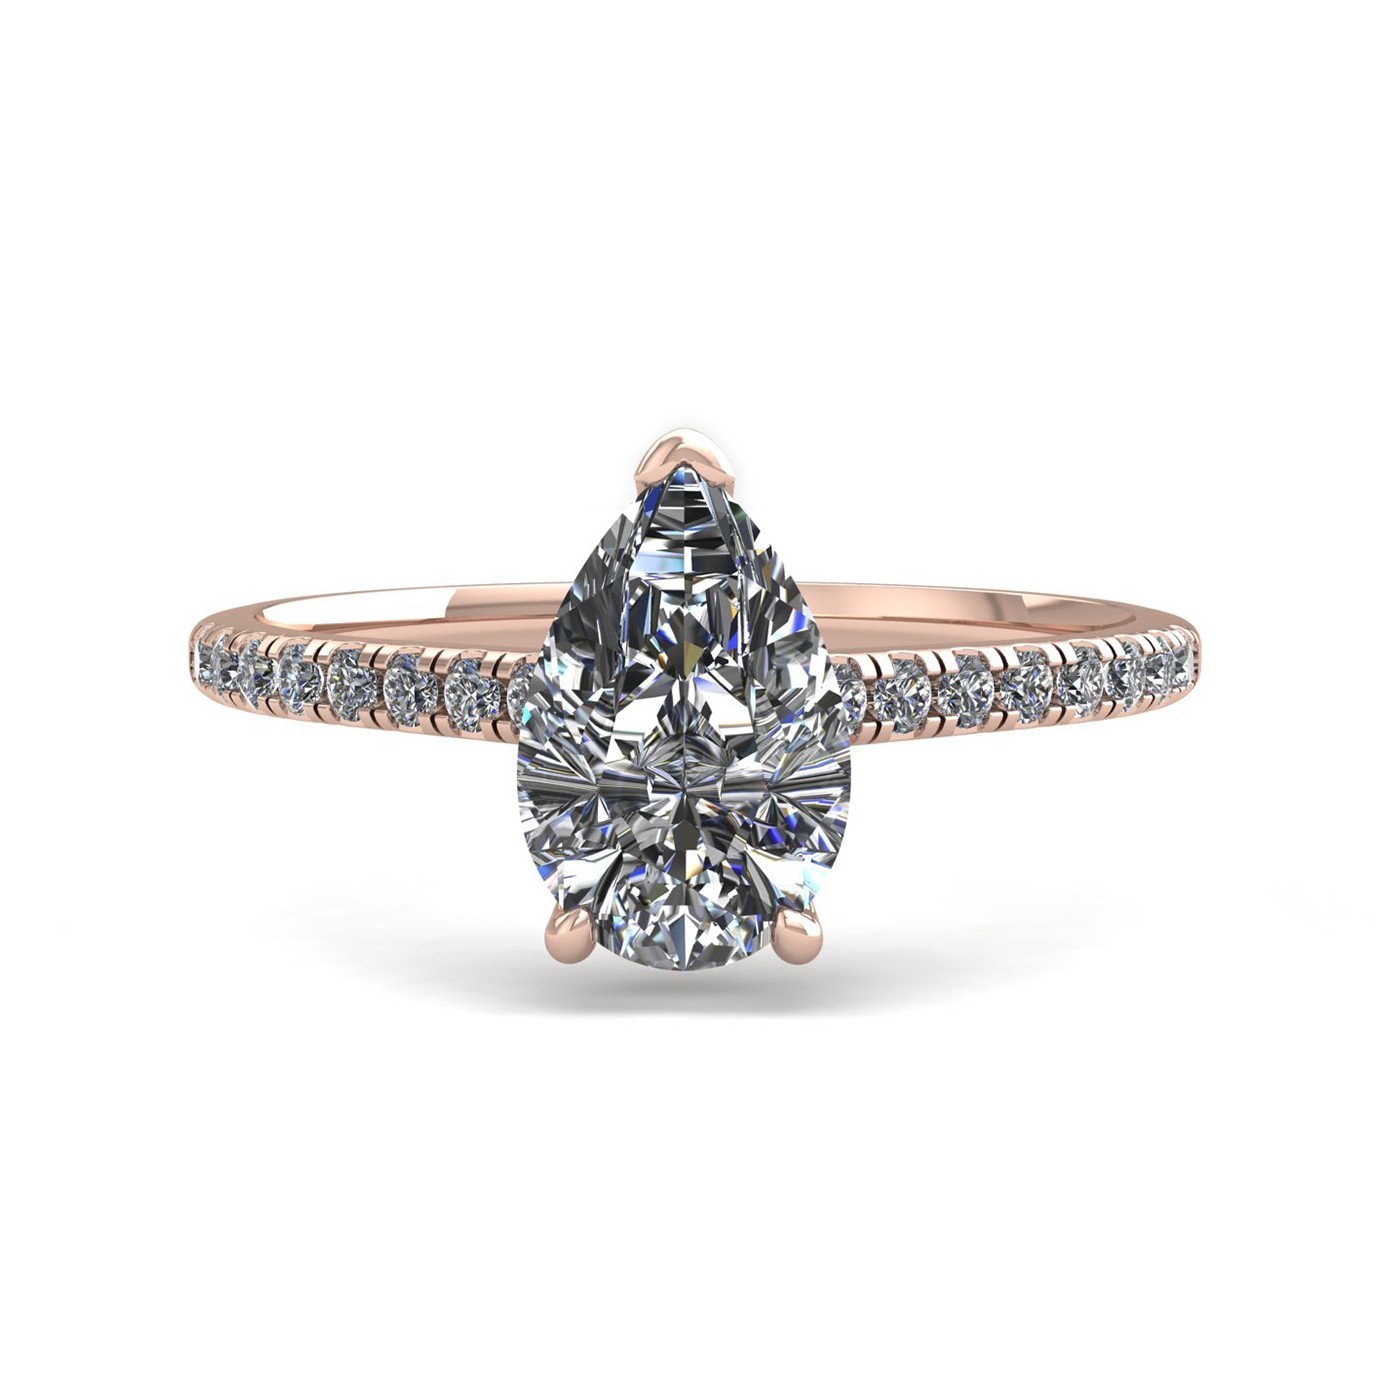 18k rose gold 1.2ct 3 prongs pear diamond engagement ring with whisper thin pavÉ set band